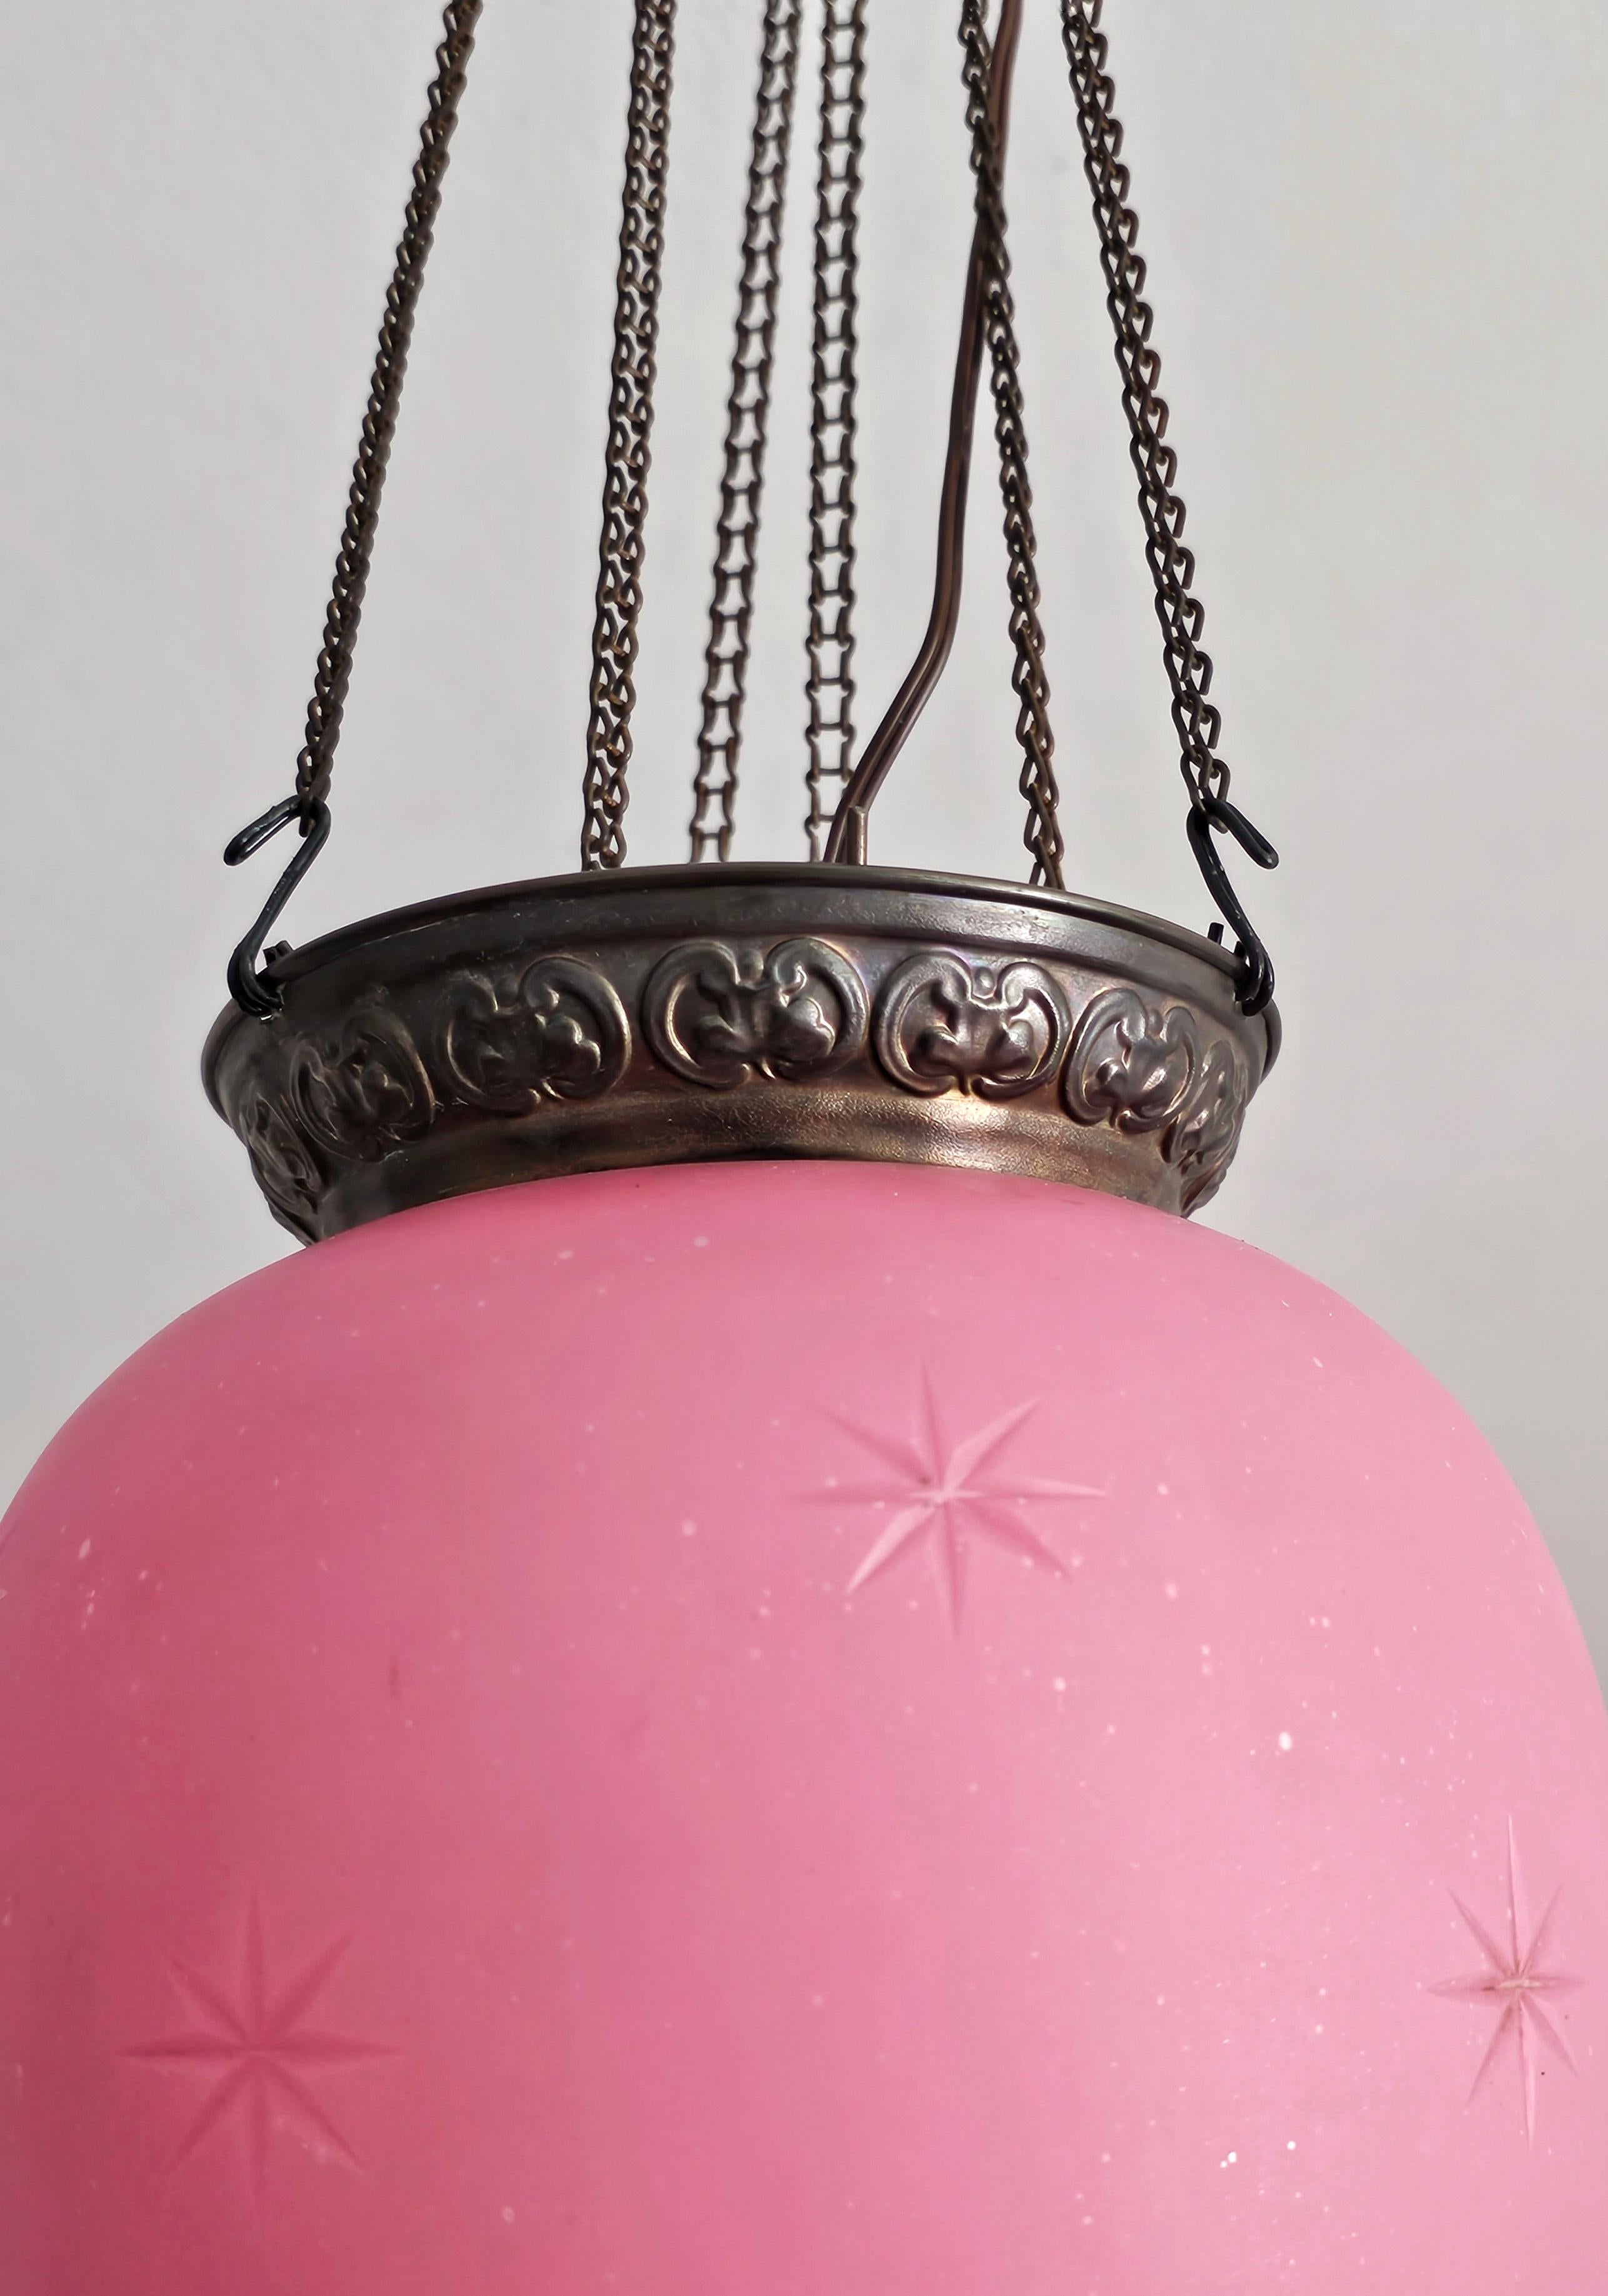 Mid-19th Century Antique Pink Glass and Brass Lantern, Austria cca. 1850s For Sale